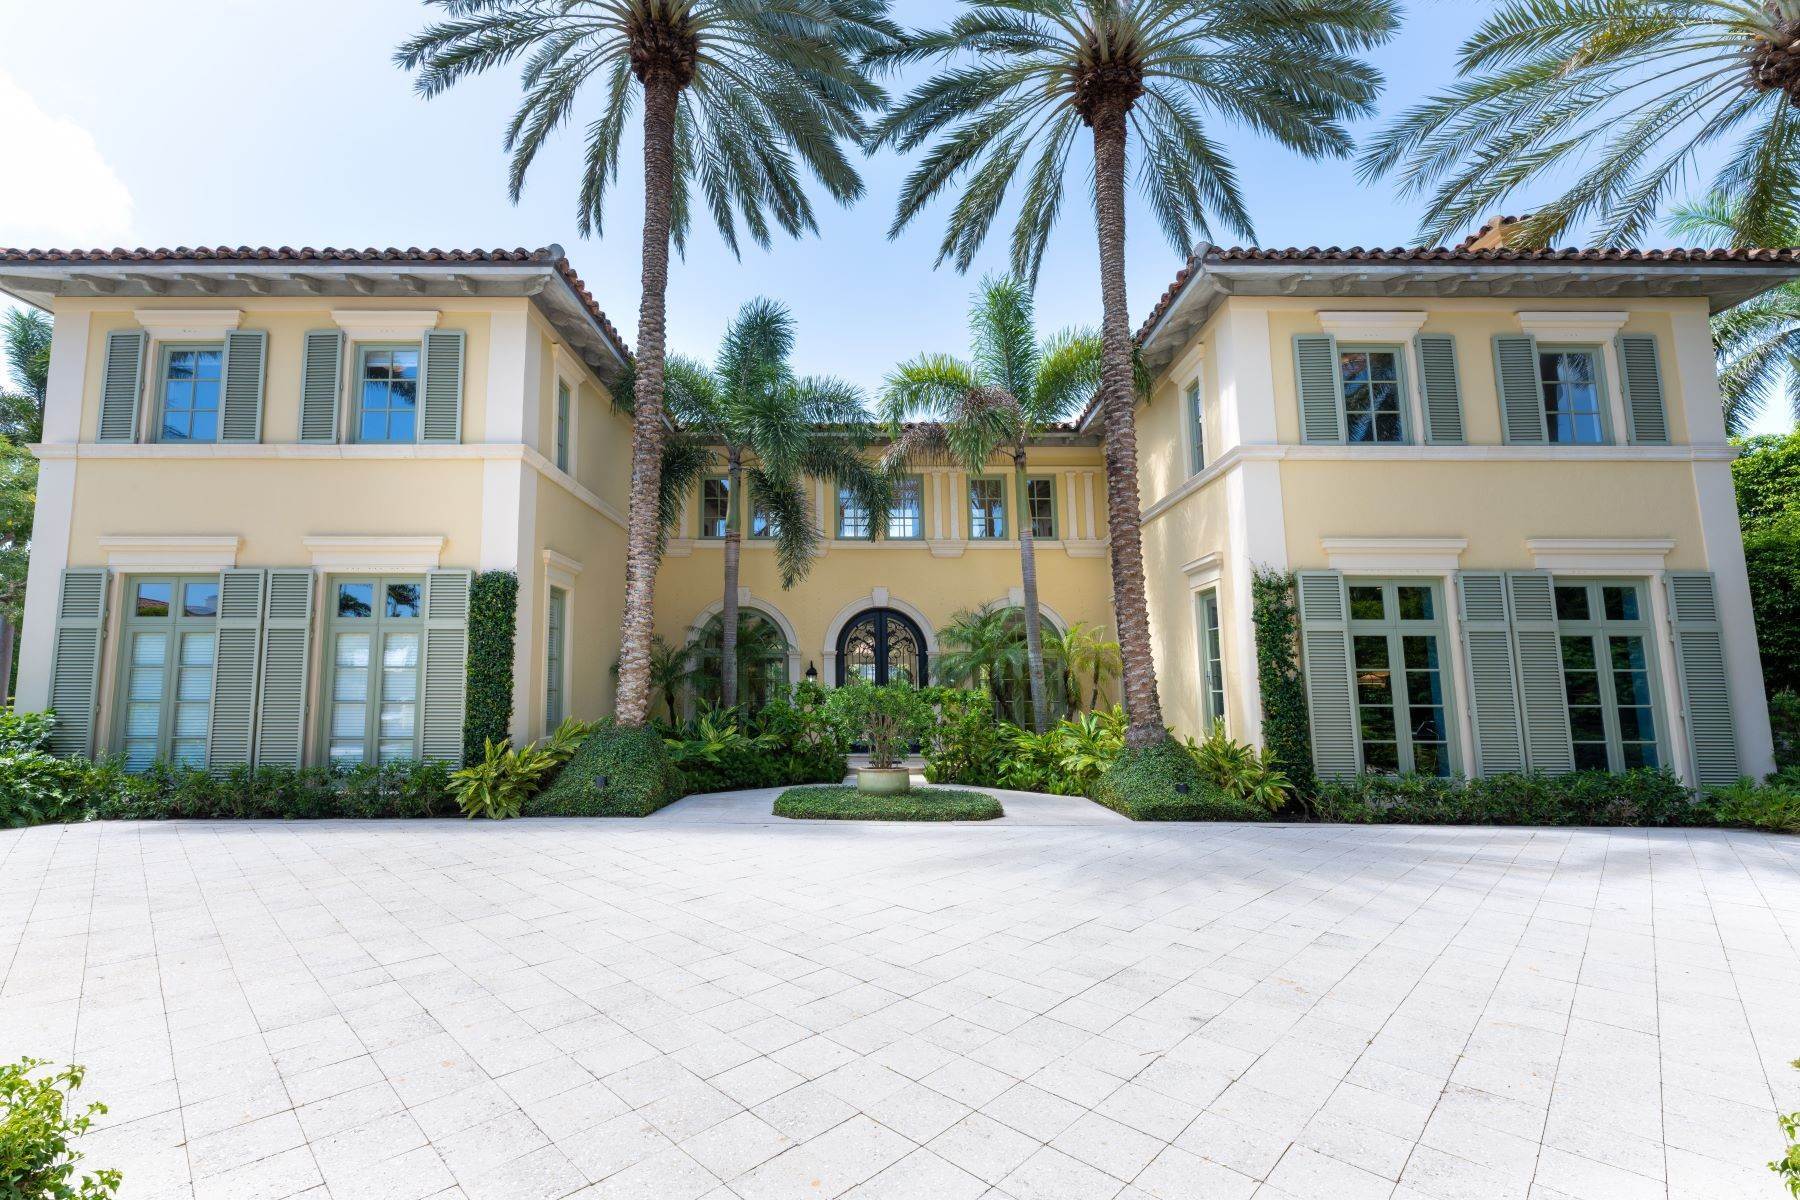 30. Single Family Homes for Sale at 1.5 Acre Palm Beach Estate 160 Clarendon Avenue Palm Beach, Florida 33480 United States